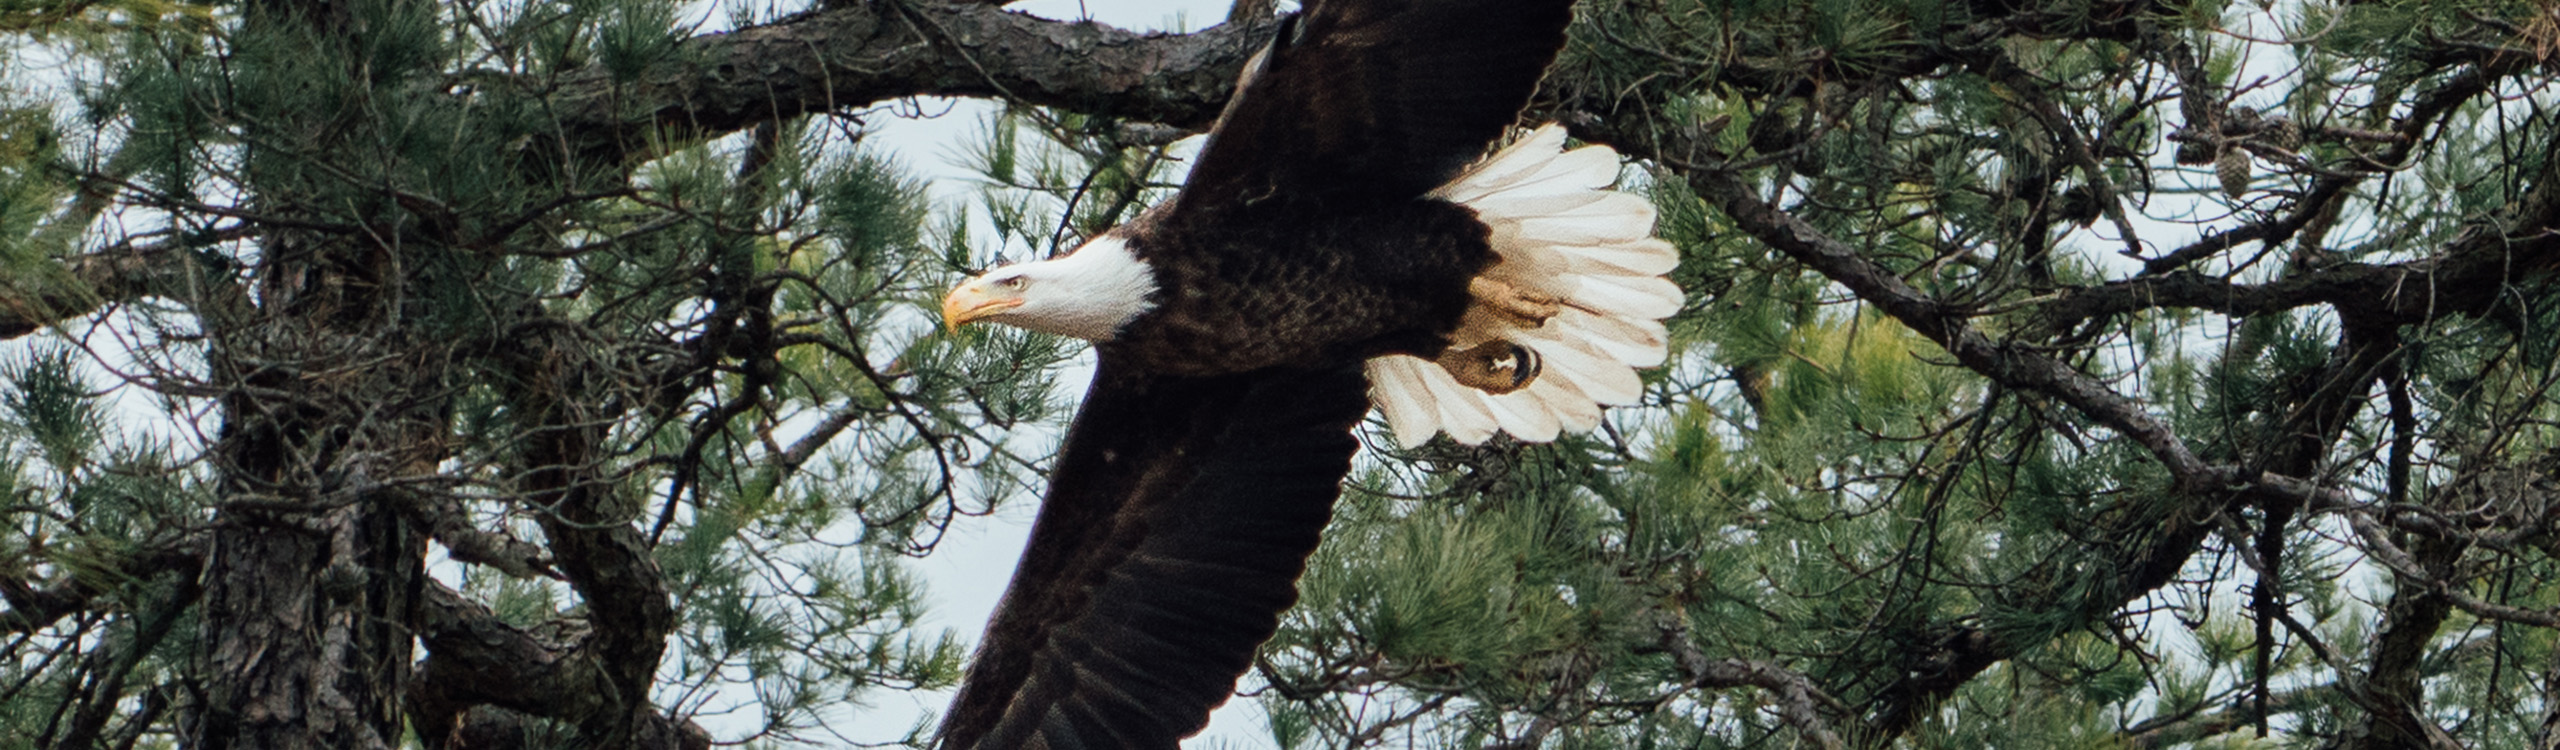 New Jersey Bald Eagle Population Continues to Climb, with 250 Active Nests Identified in 2022